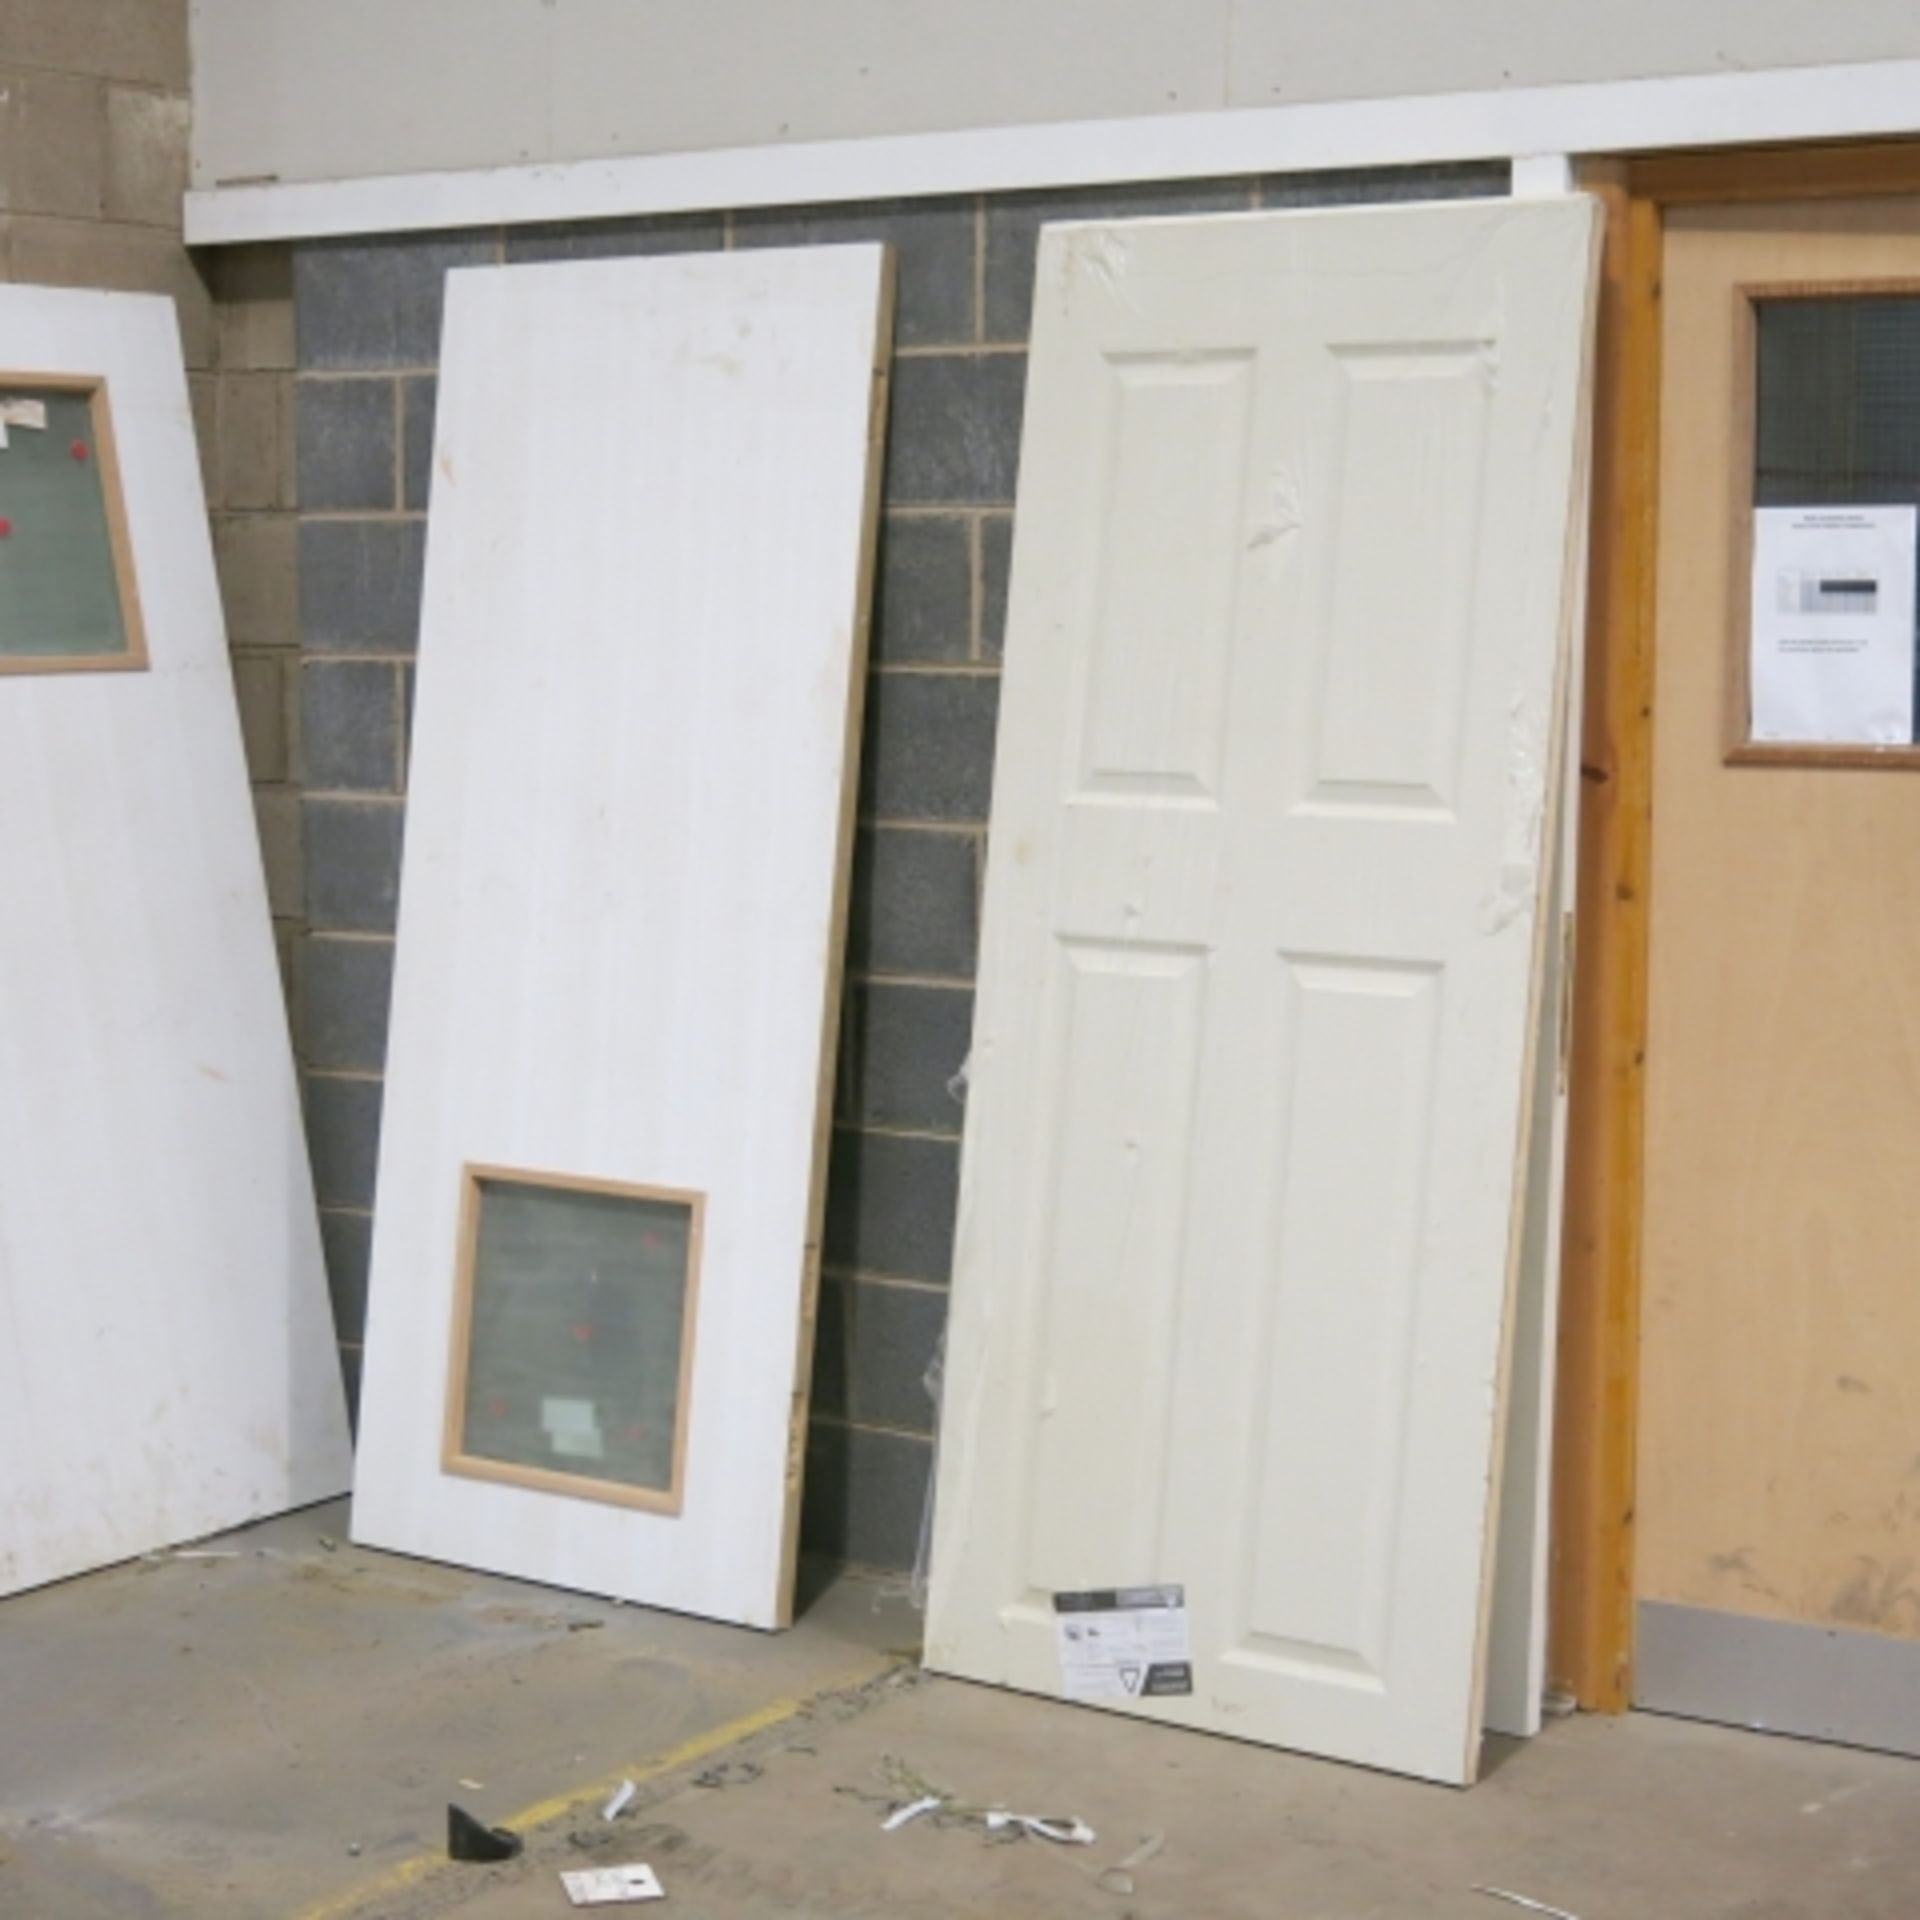 * 5 x Various Partially Glazed Firedoors; an Unused Jeldwen Four Panel Door and a Similar Used